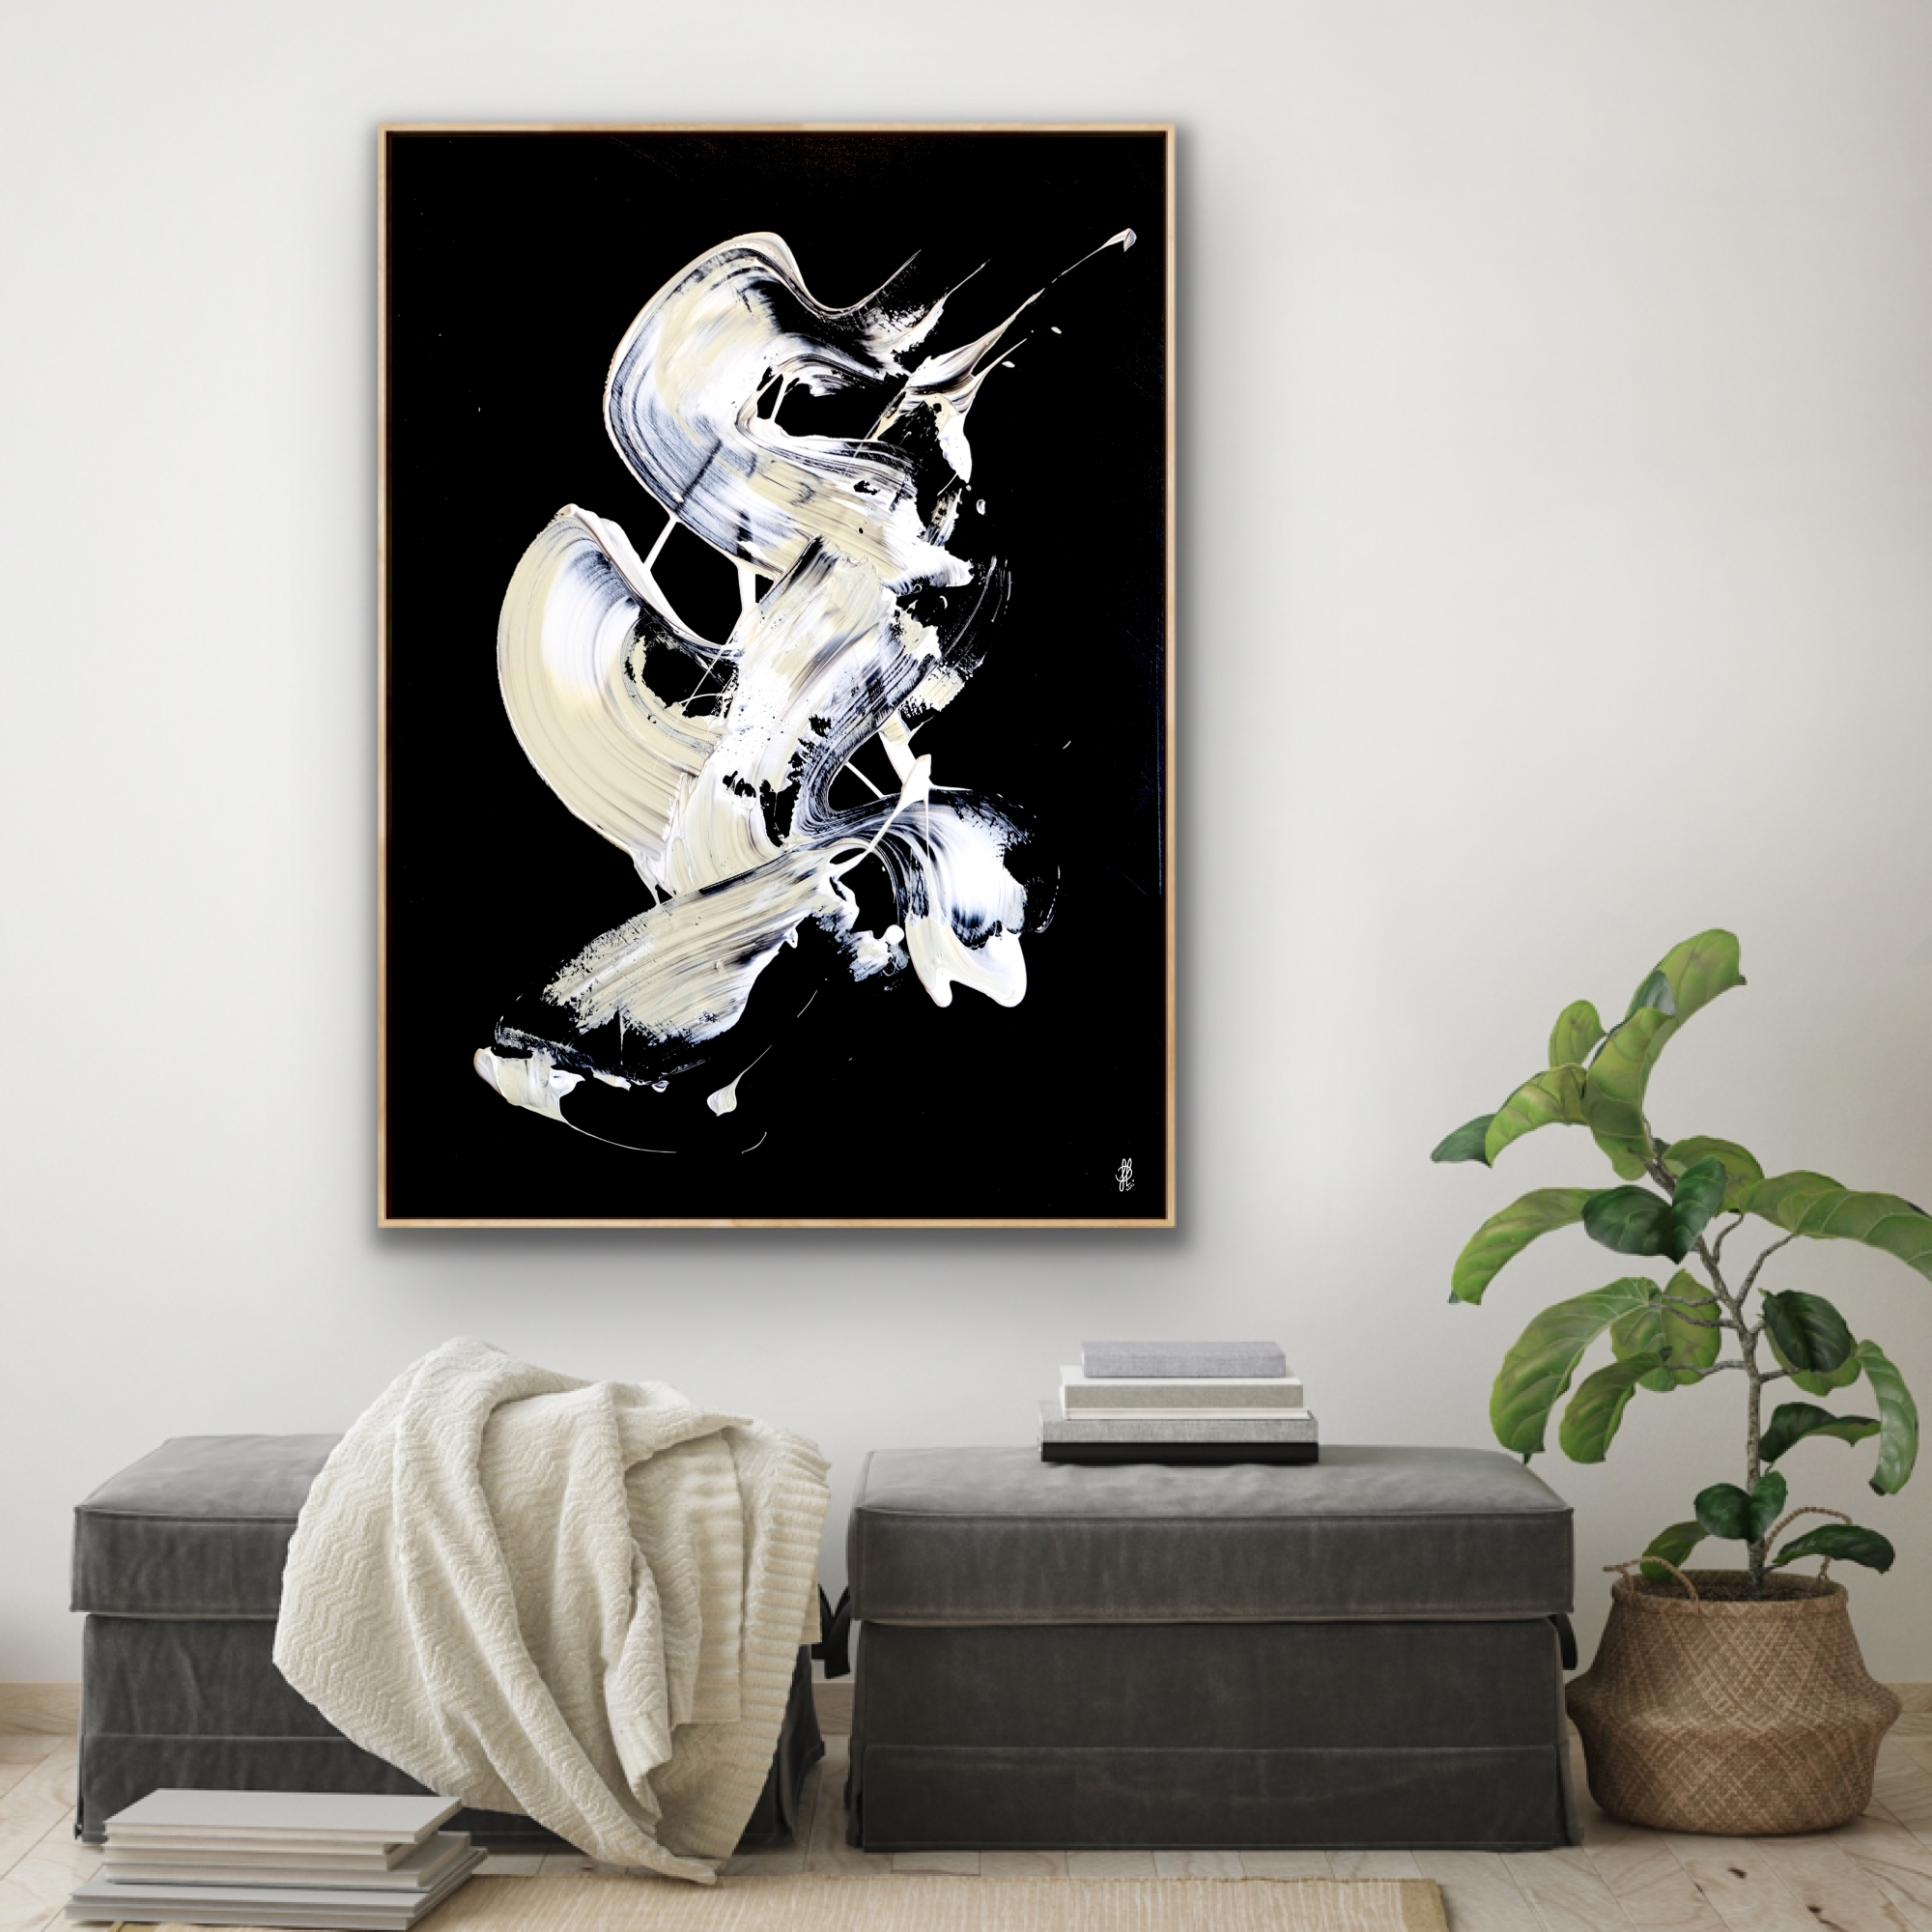 Canvas Print: "Less Is More #8"